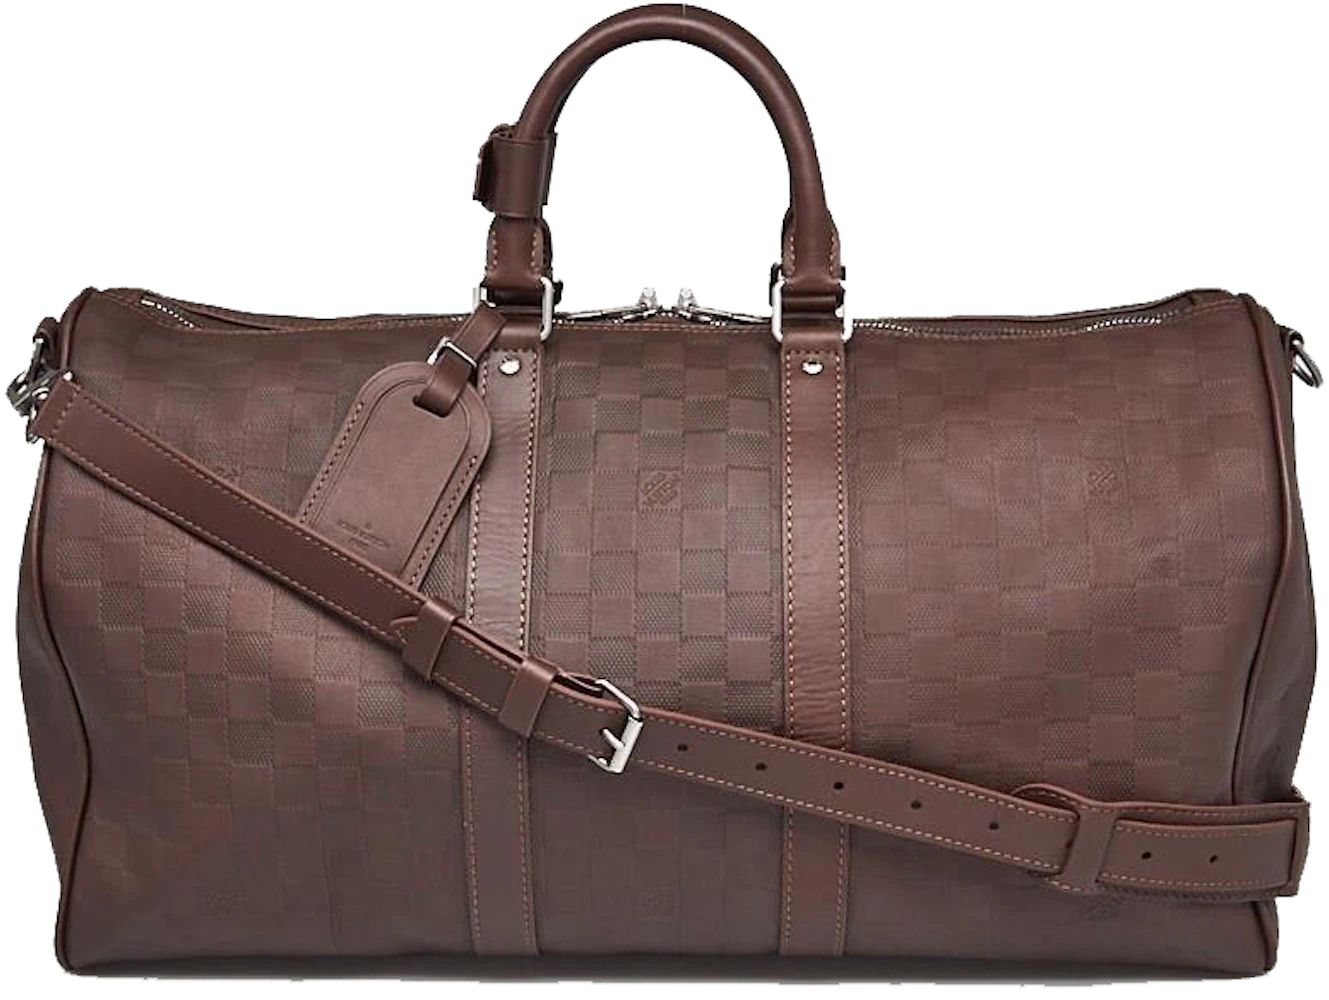 The Louis Vuitton Keepall Bandoulière in Damier Infini leather is a sure  way to brighten this Father's Day.